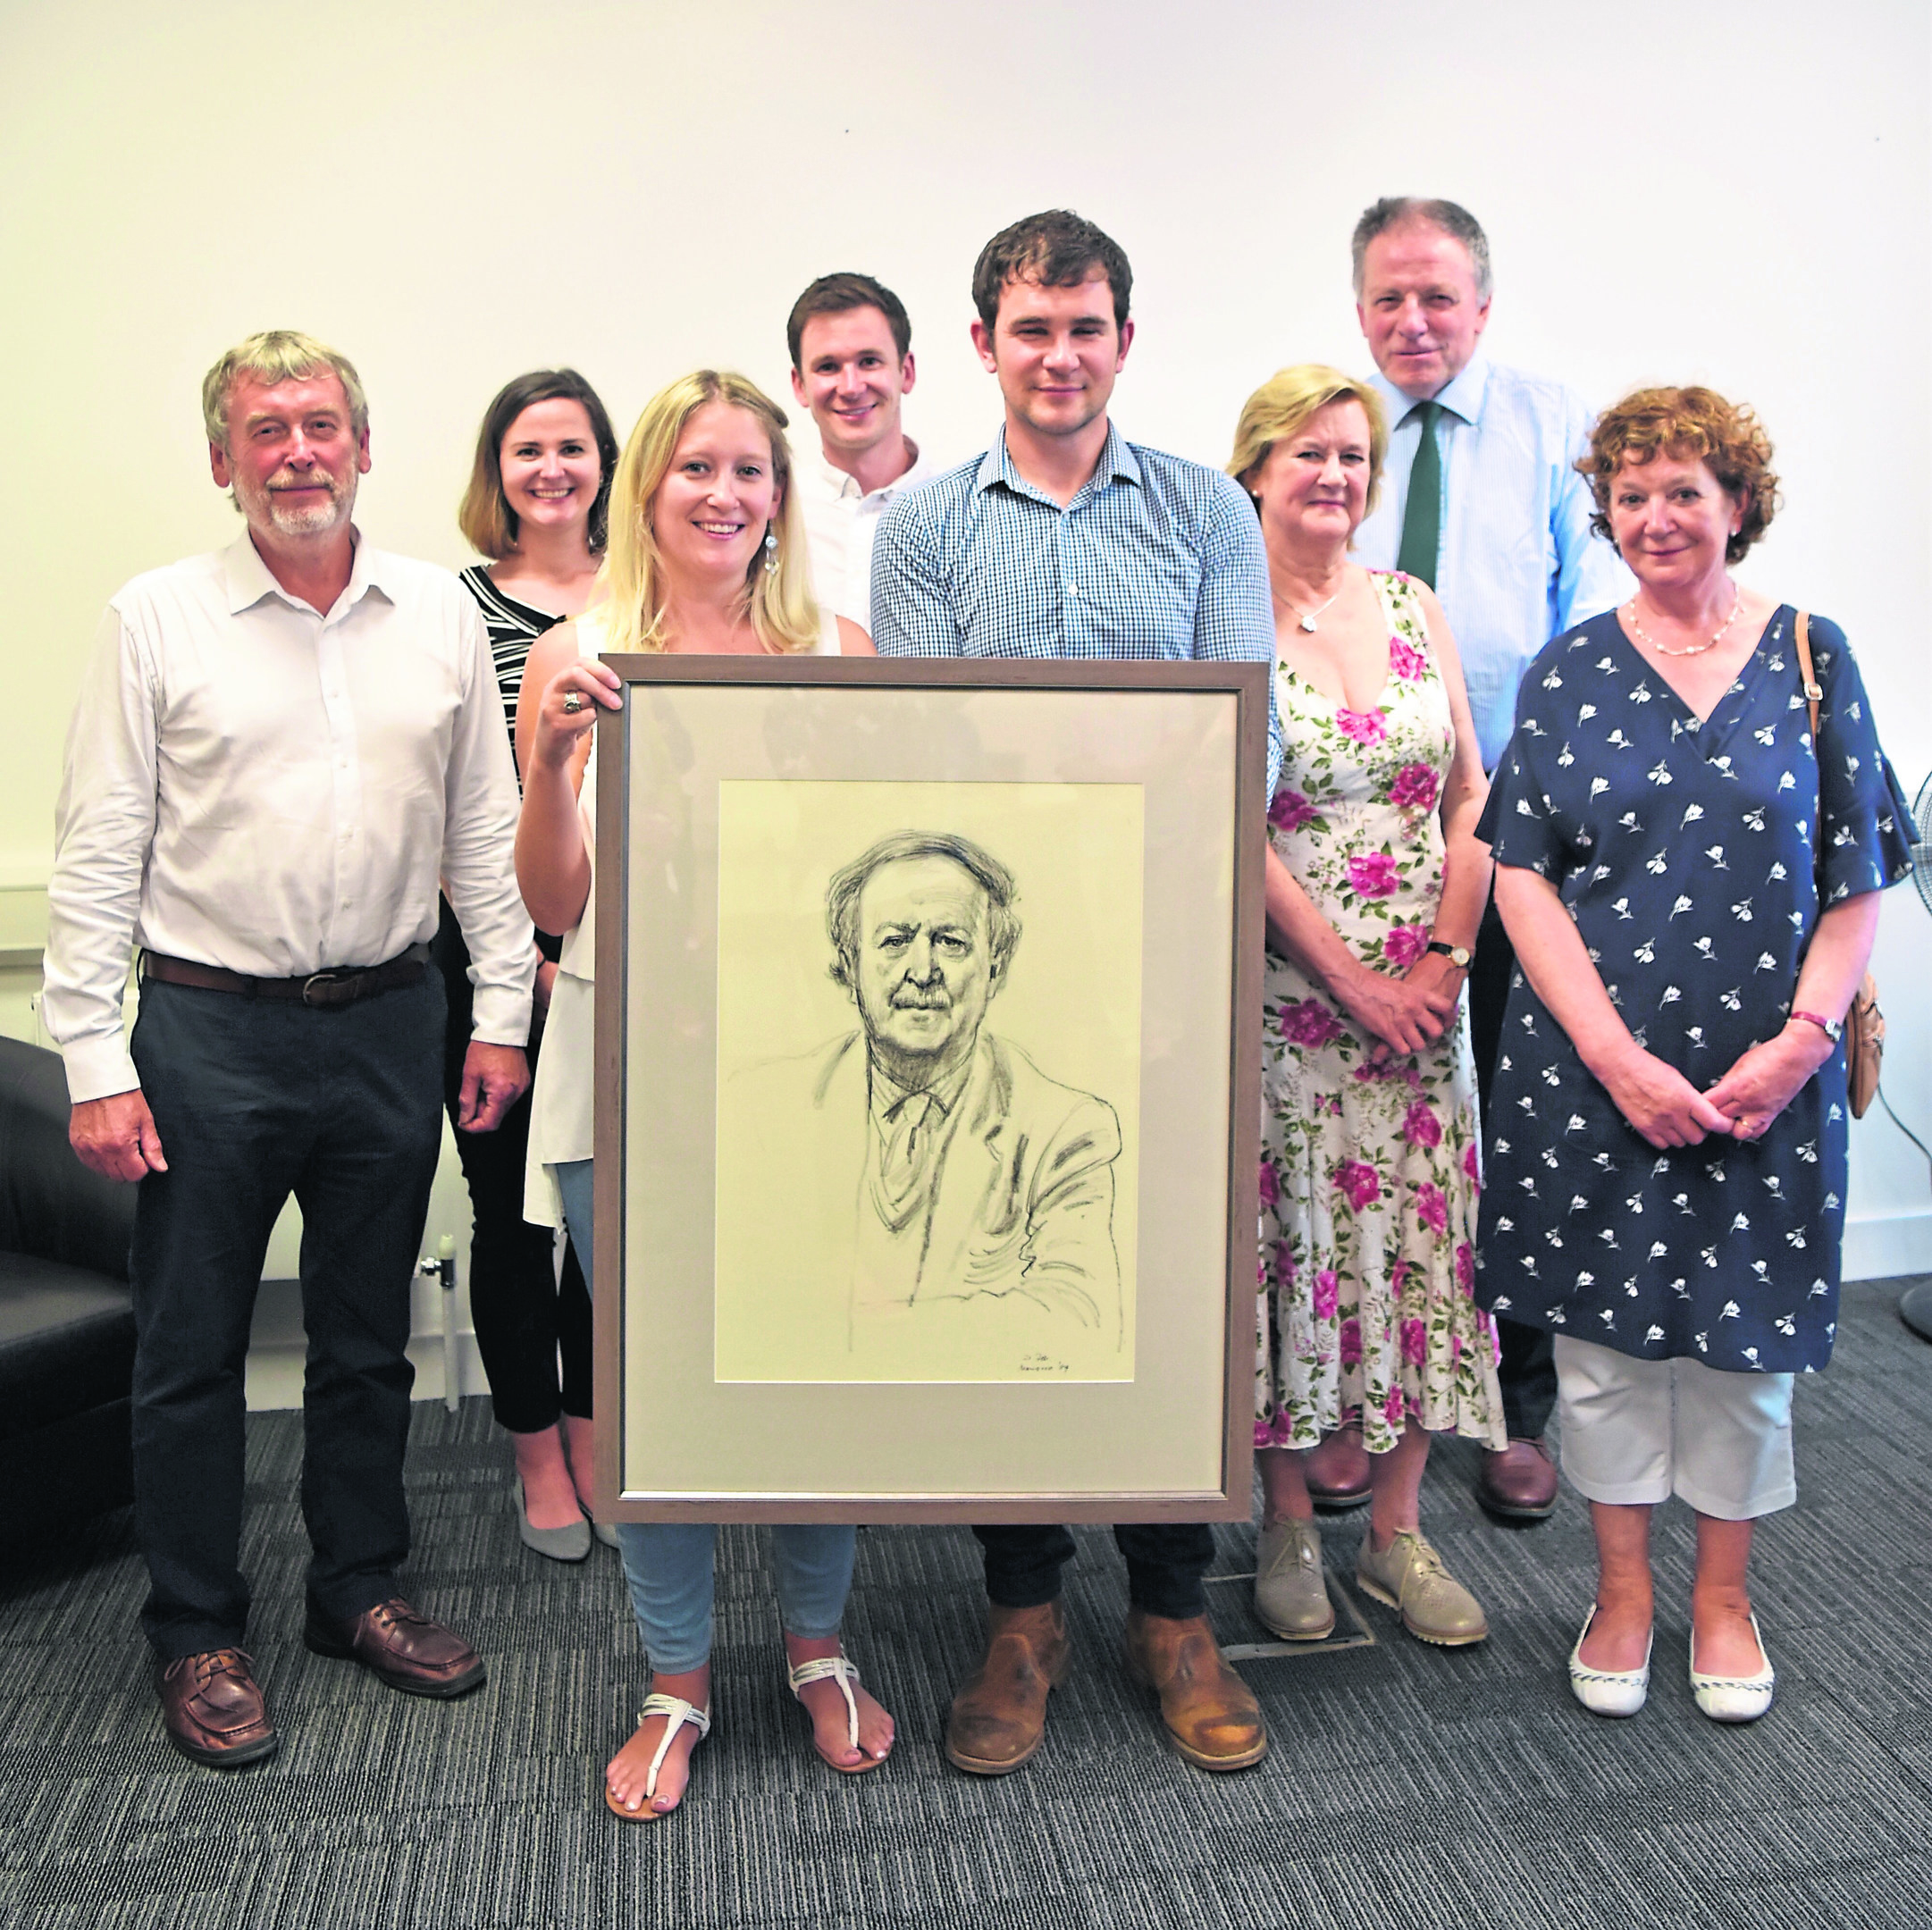 The collection of books belonging to the renowned poet Sorley Maclean was officially unveiled at a reception on July 27, attended by family and trustees of the Sorley Maclean Trust.